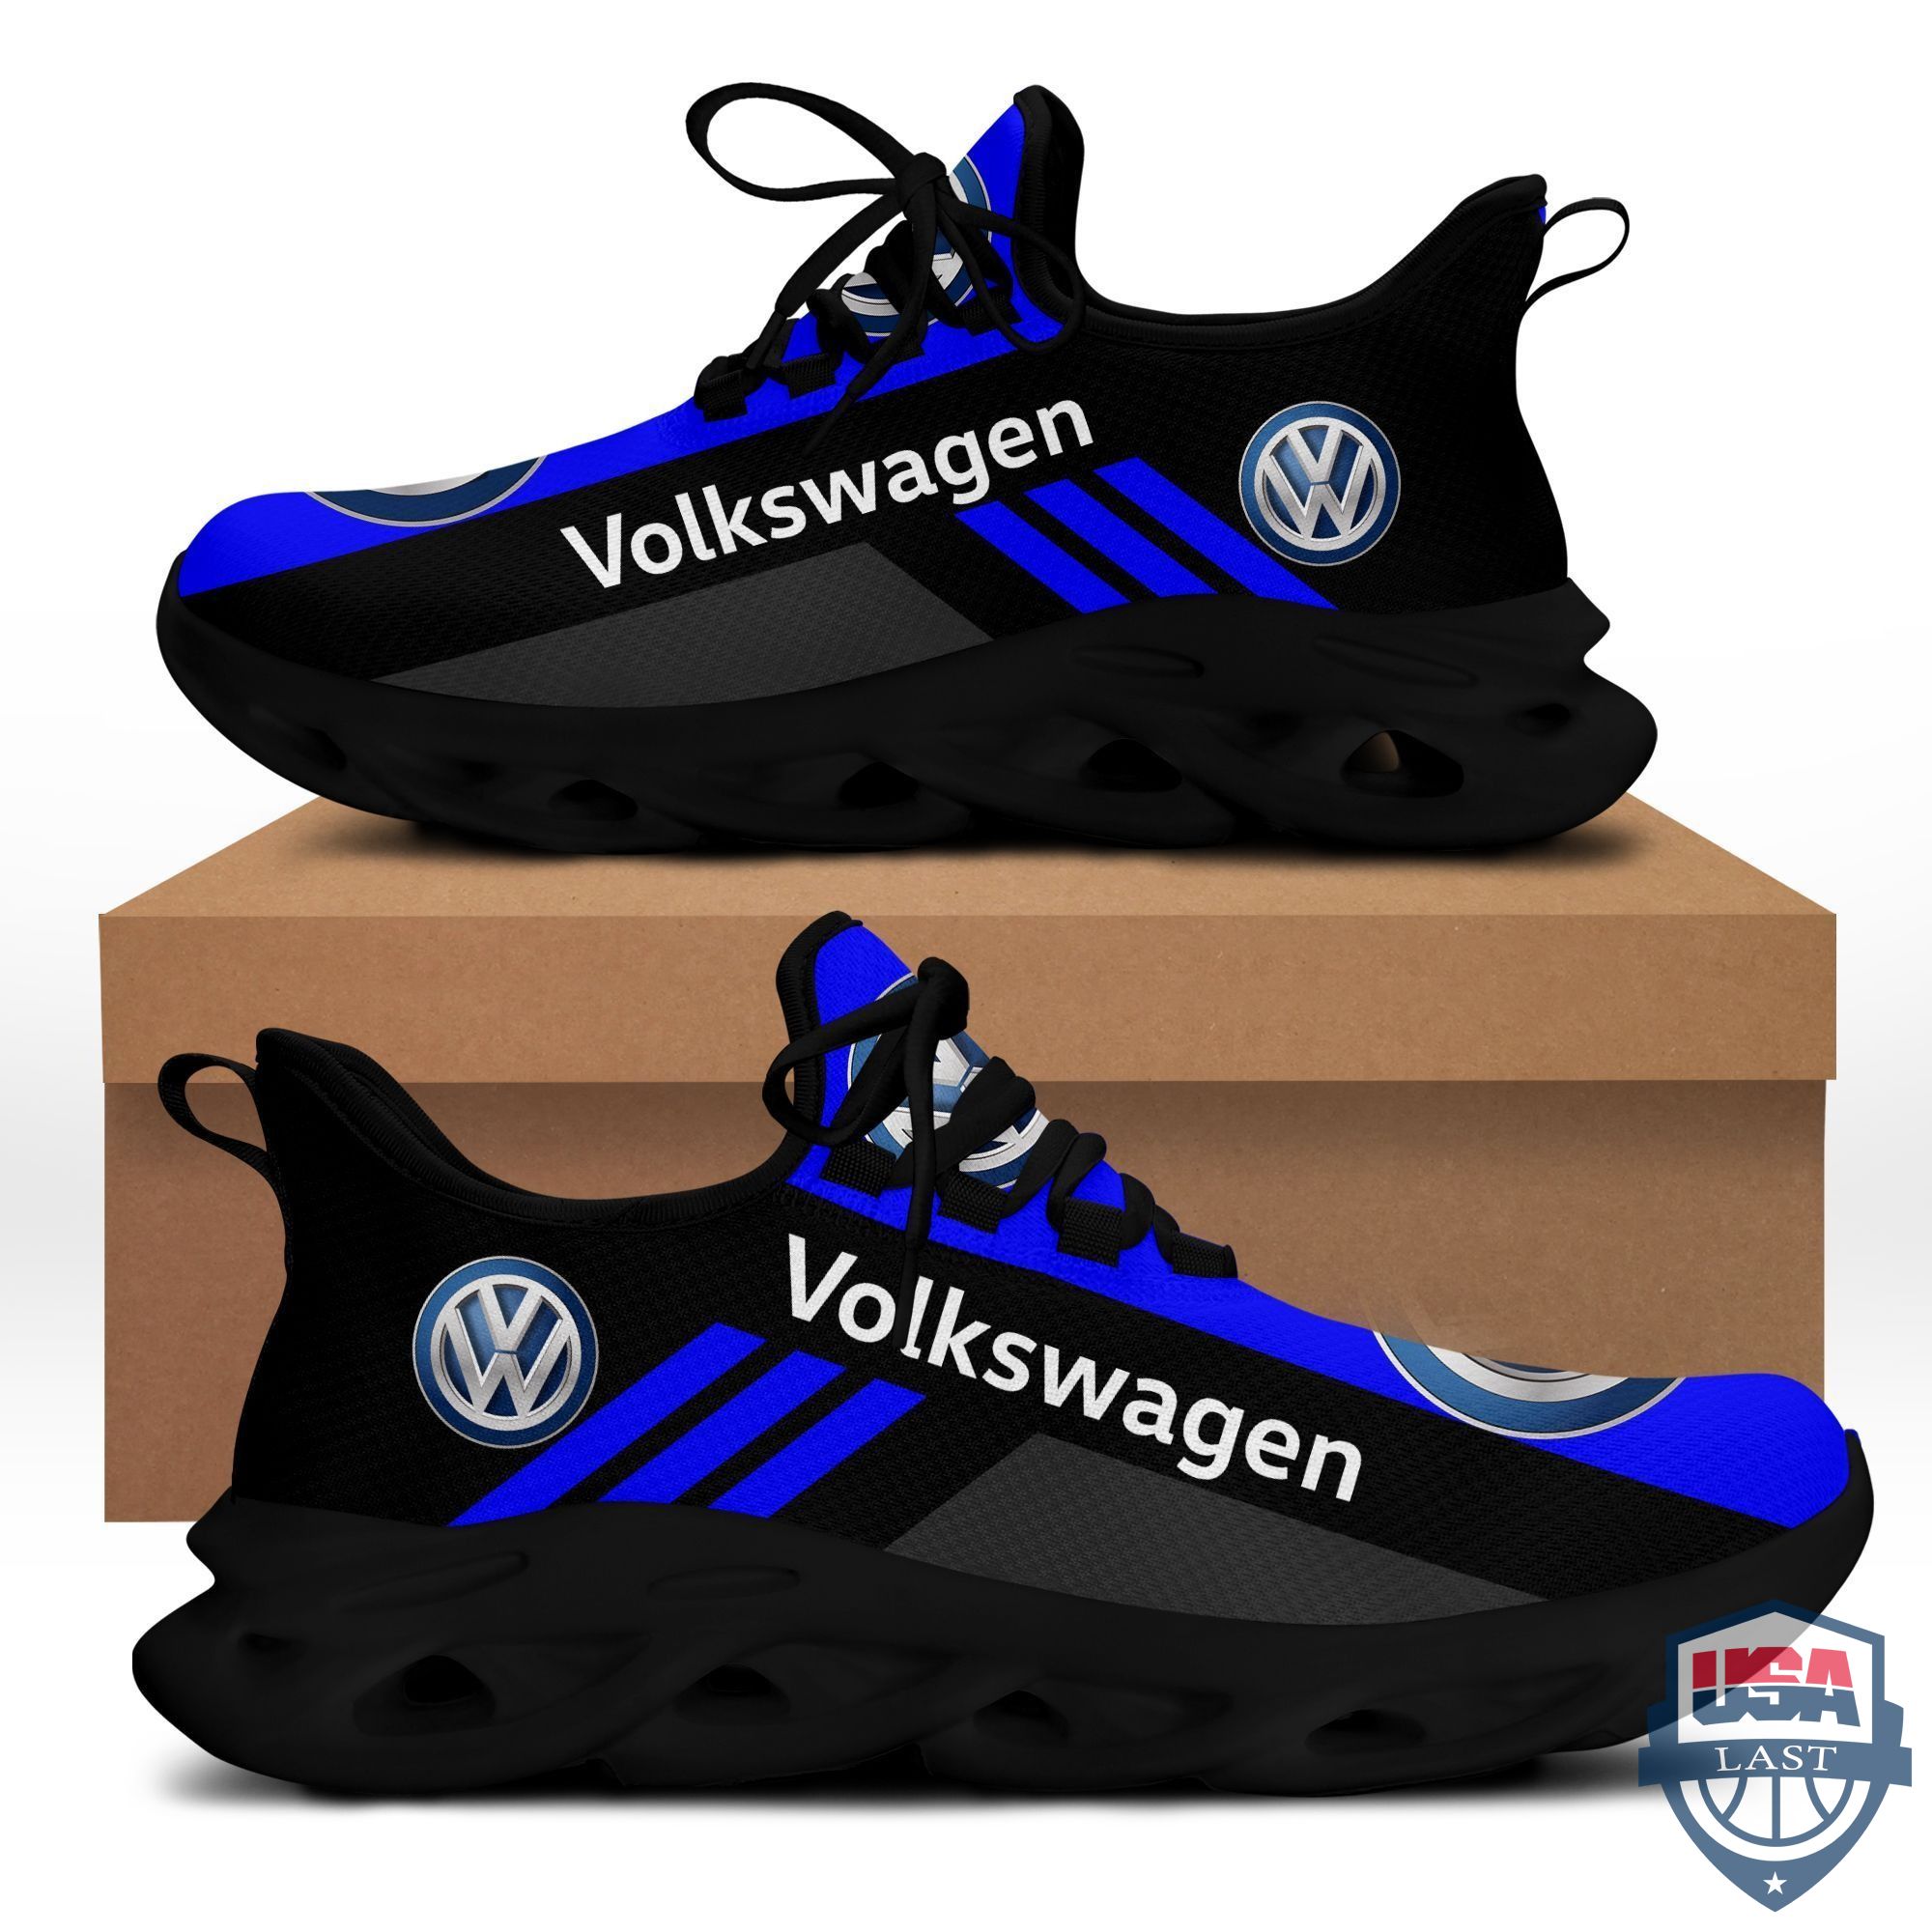 Volkswagen Sneaker Max Soul Shoes Red Version